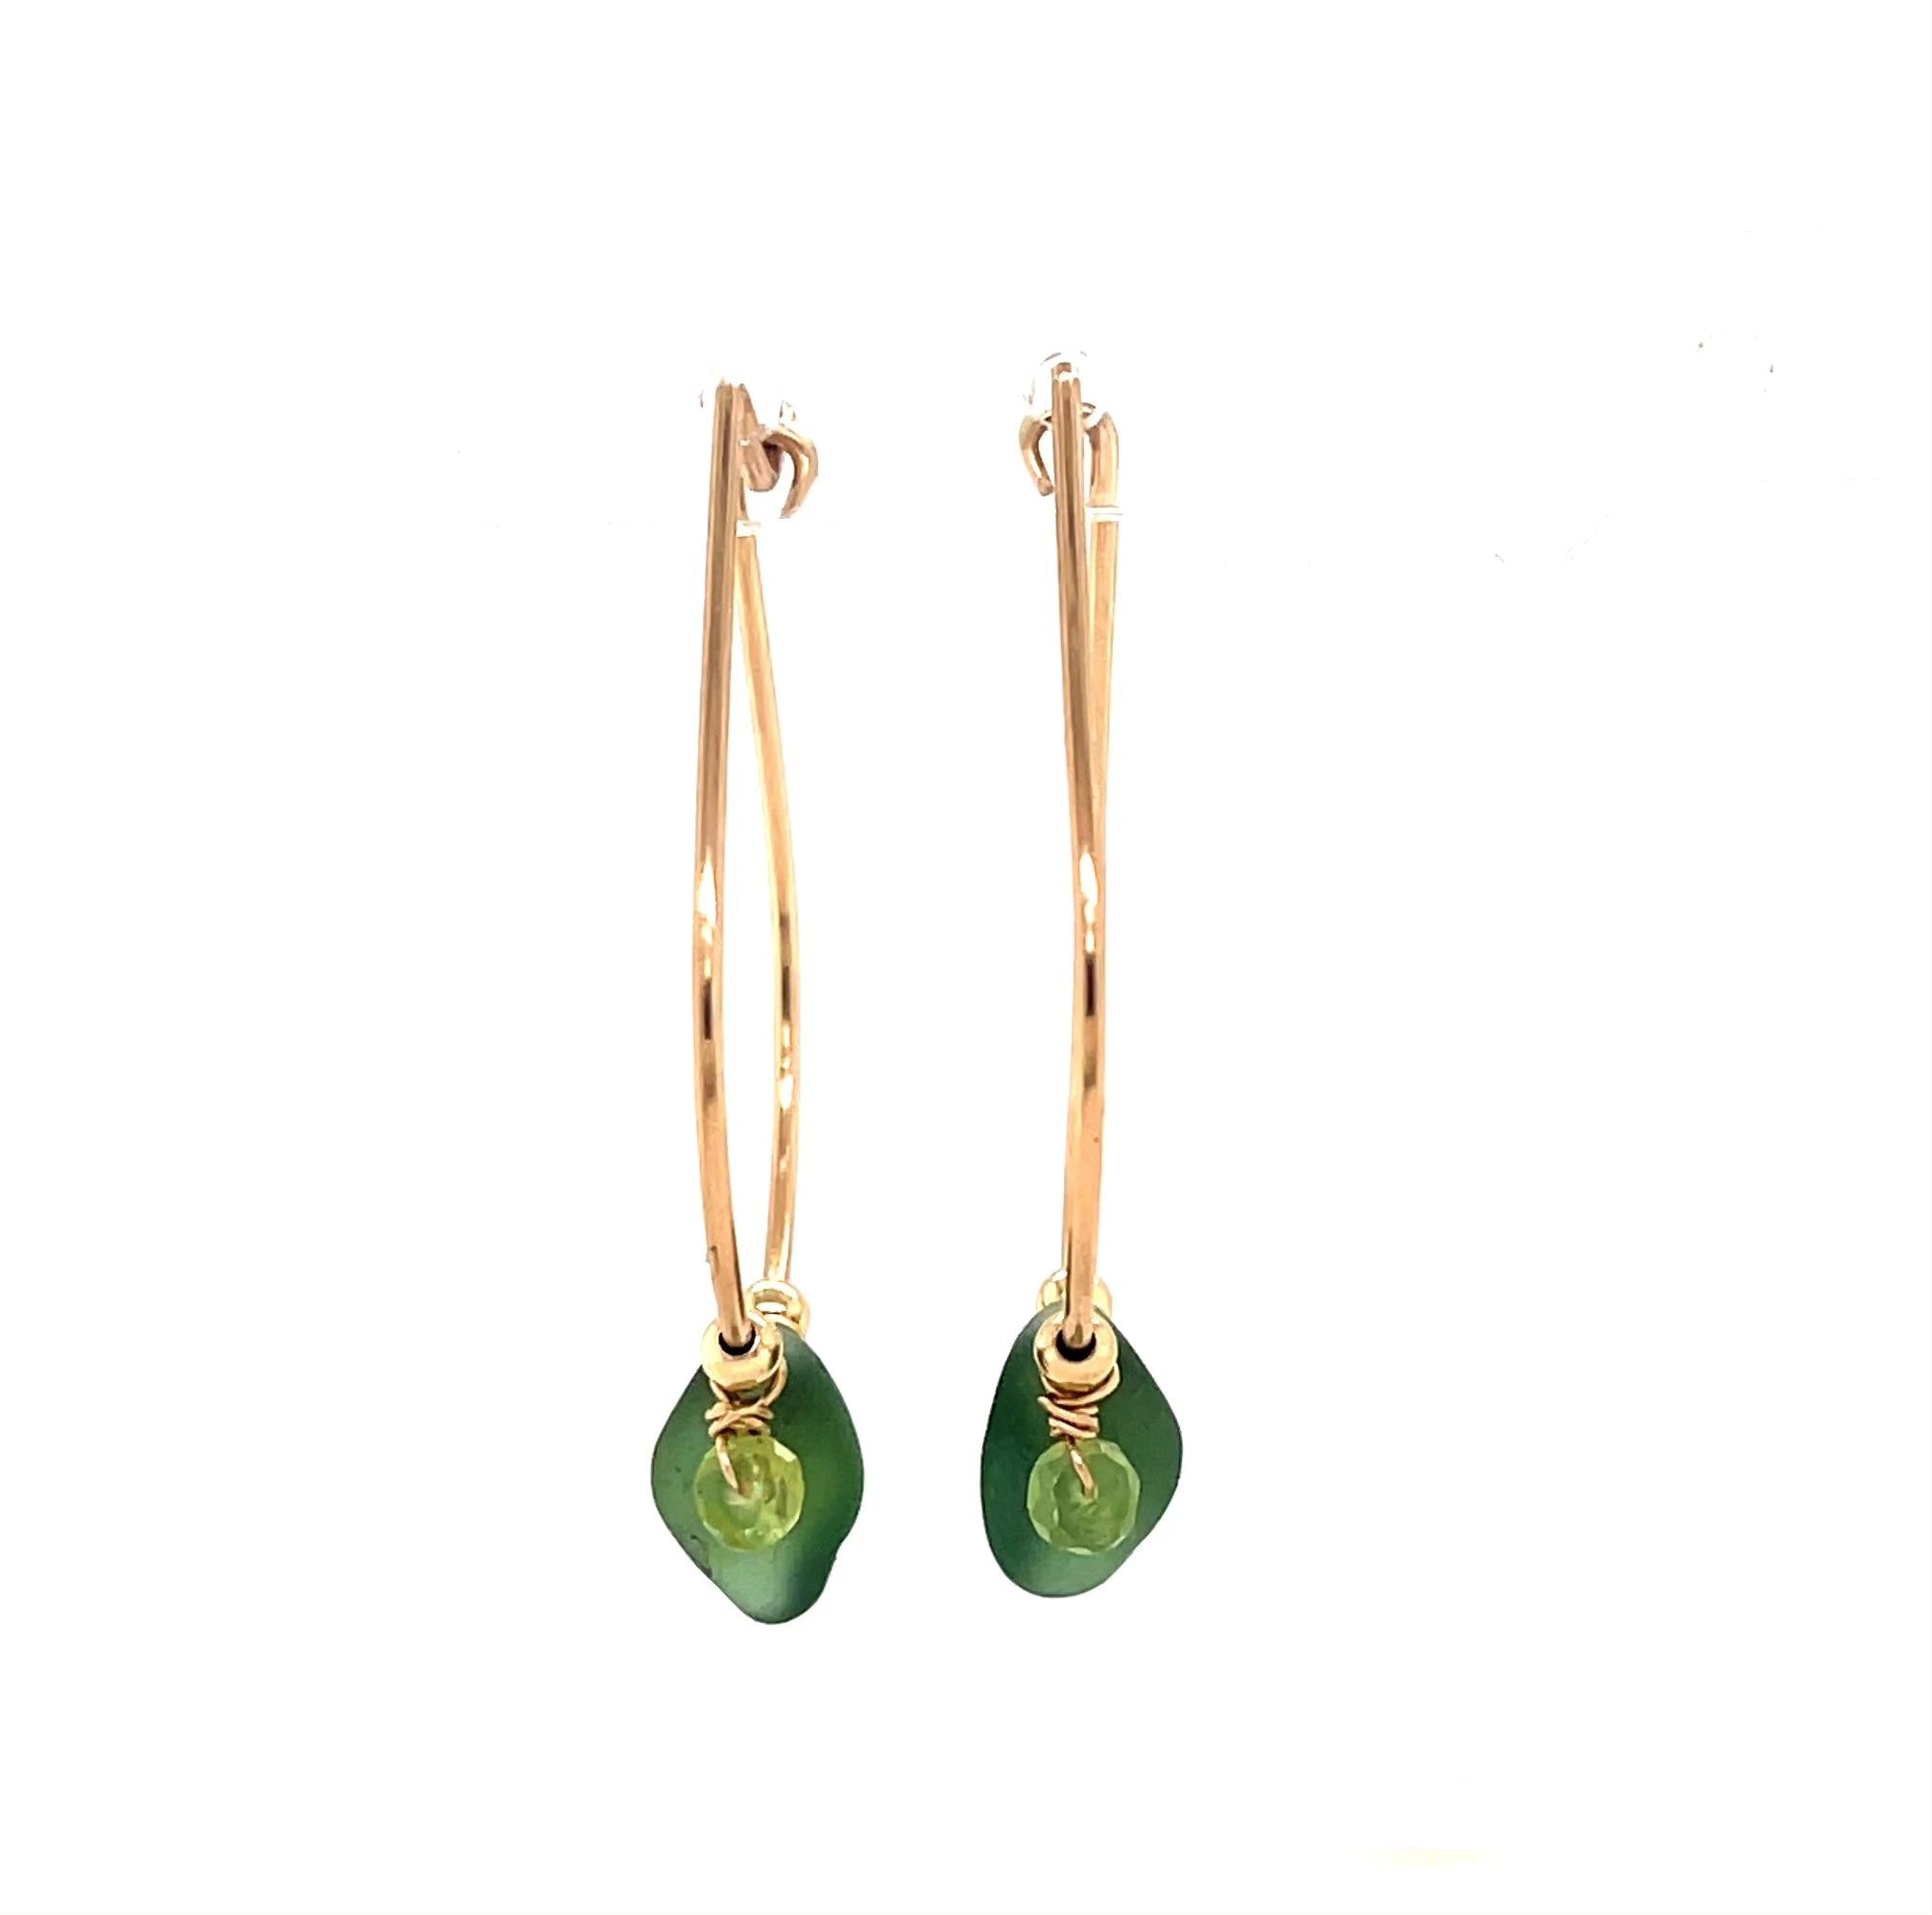 Half Hoop Earrings with Green Sea Glass and Peridot - Stylish Gold Earrings for Everyday Wear